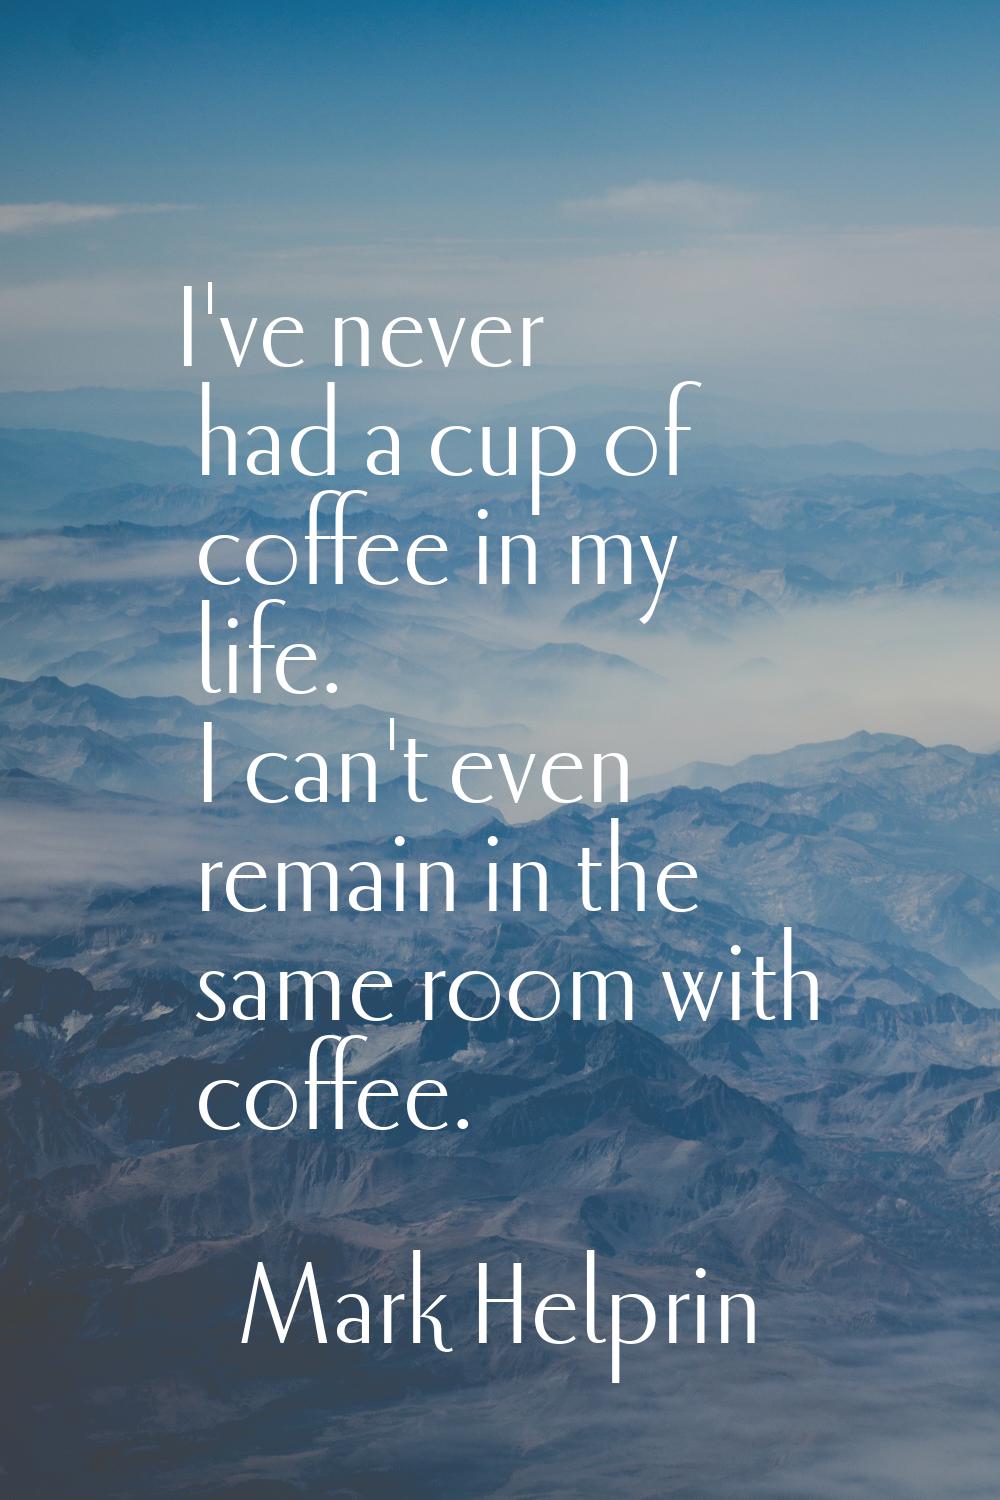 I've never had a cup of coffee in my life. I can't even remain in the same room with coffee.